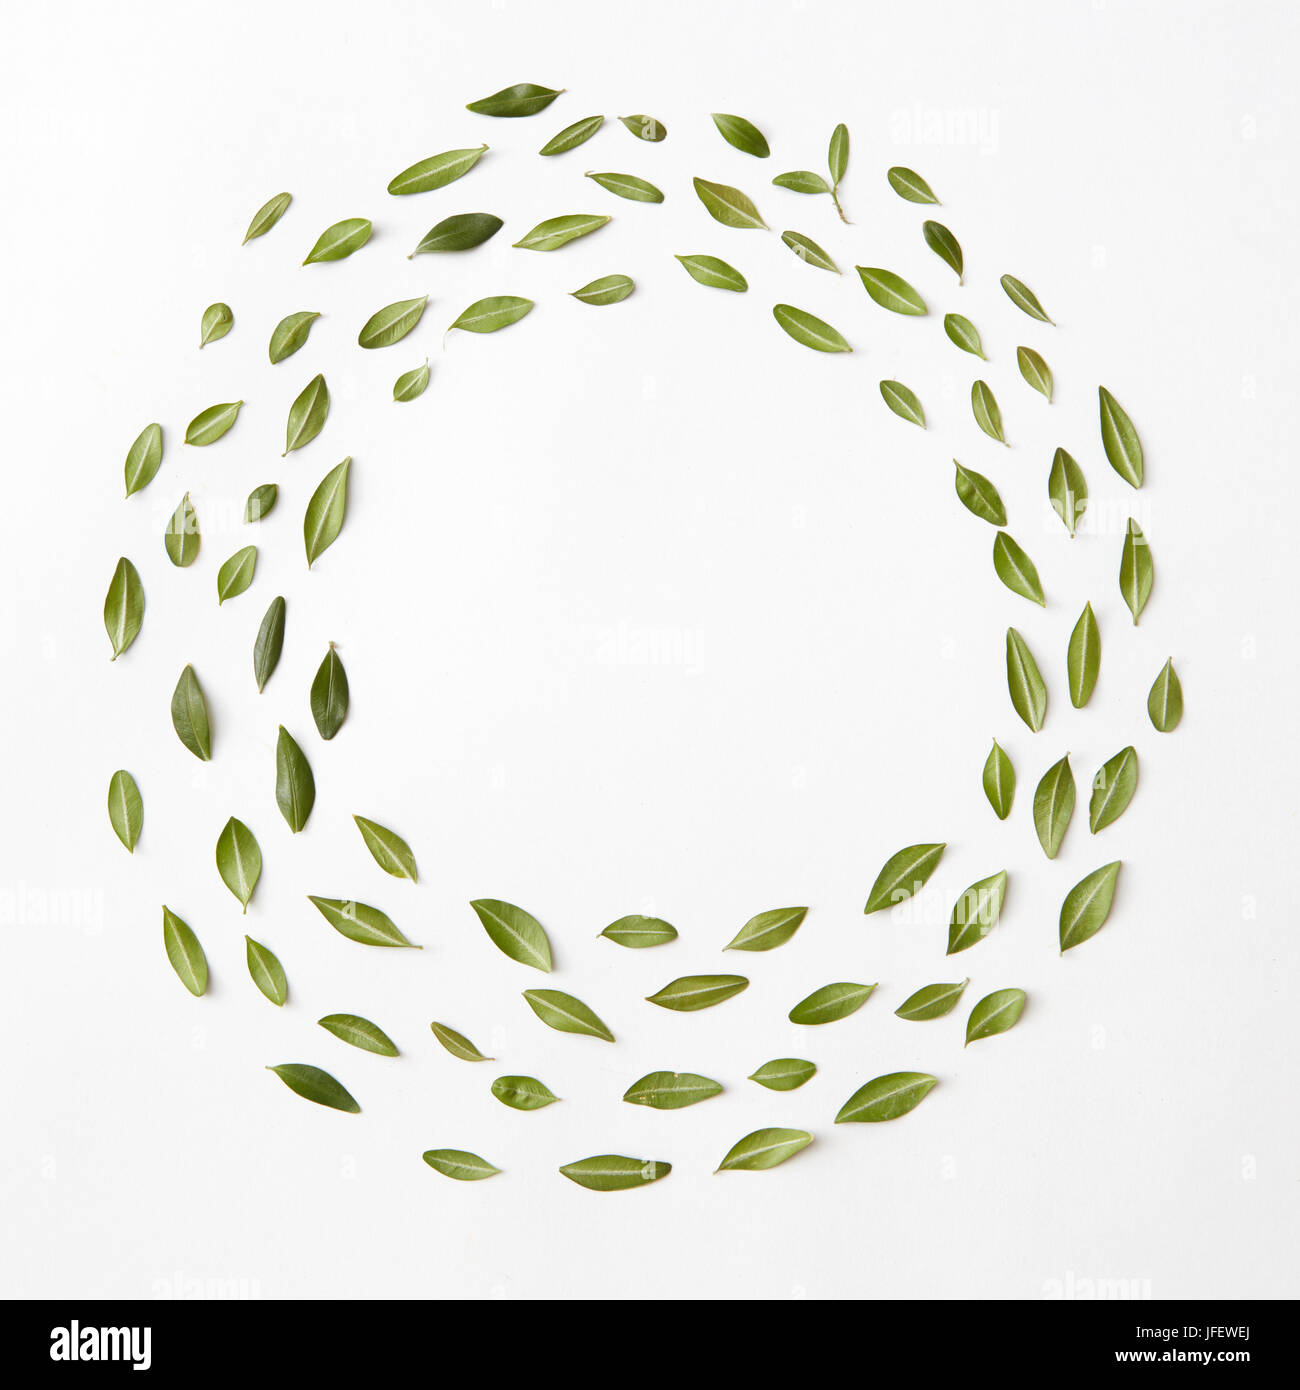 round frame of leaves Stock Photo